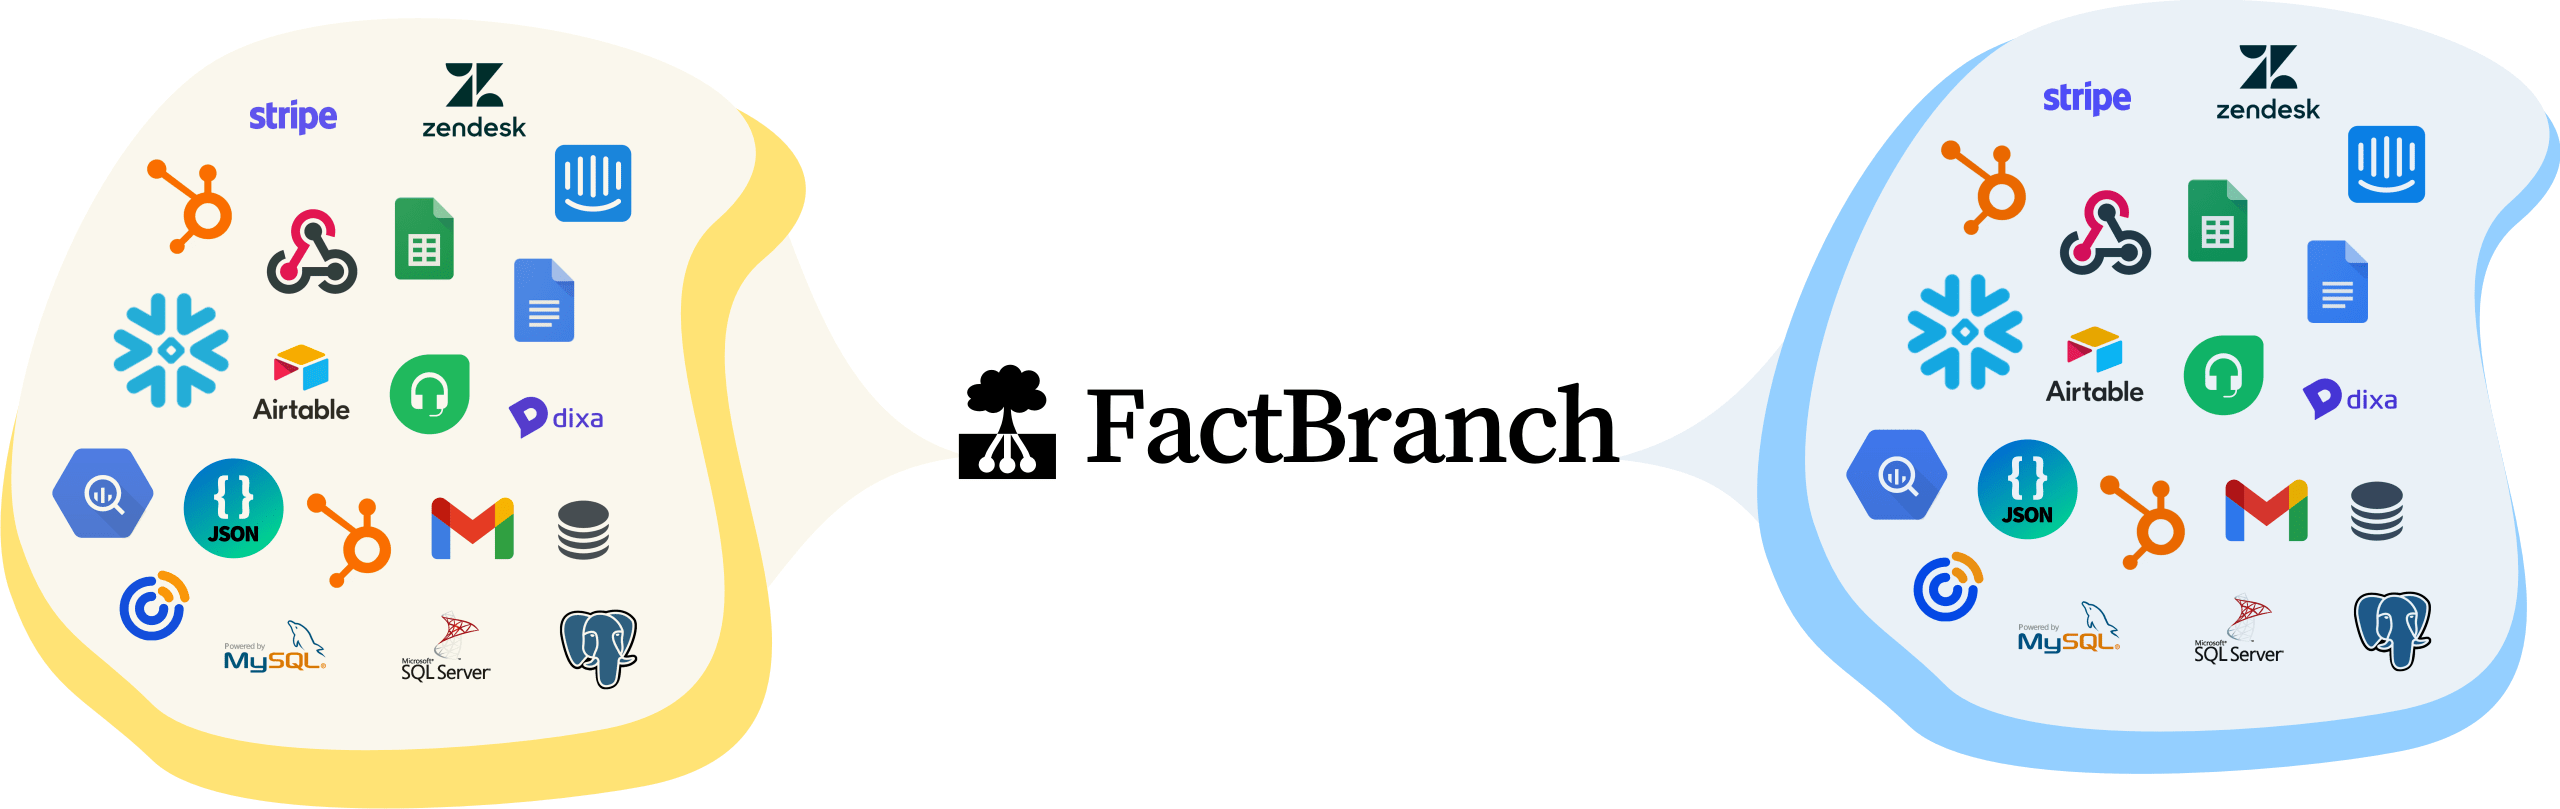 FactBranch extracts, transforms and loads data from many different
      data sources to many data targets.